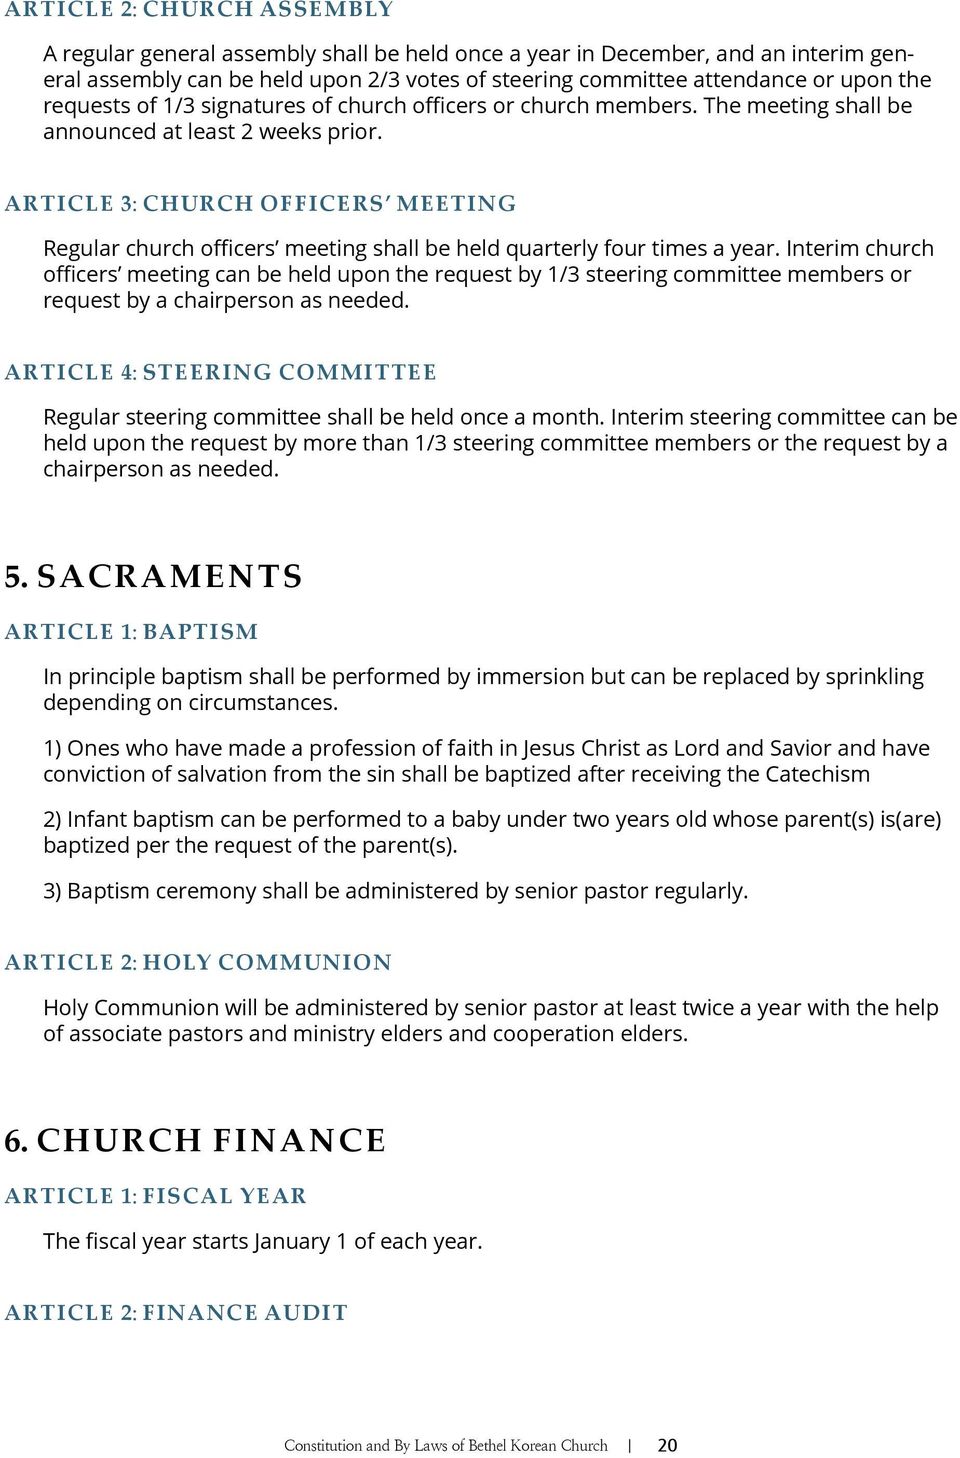 Article 3: Church Officers Meeting Regular church officers meeting shall be held quarterly four times a year.